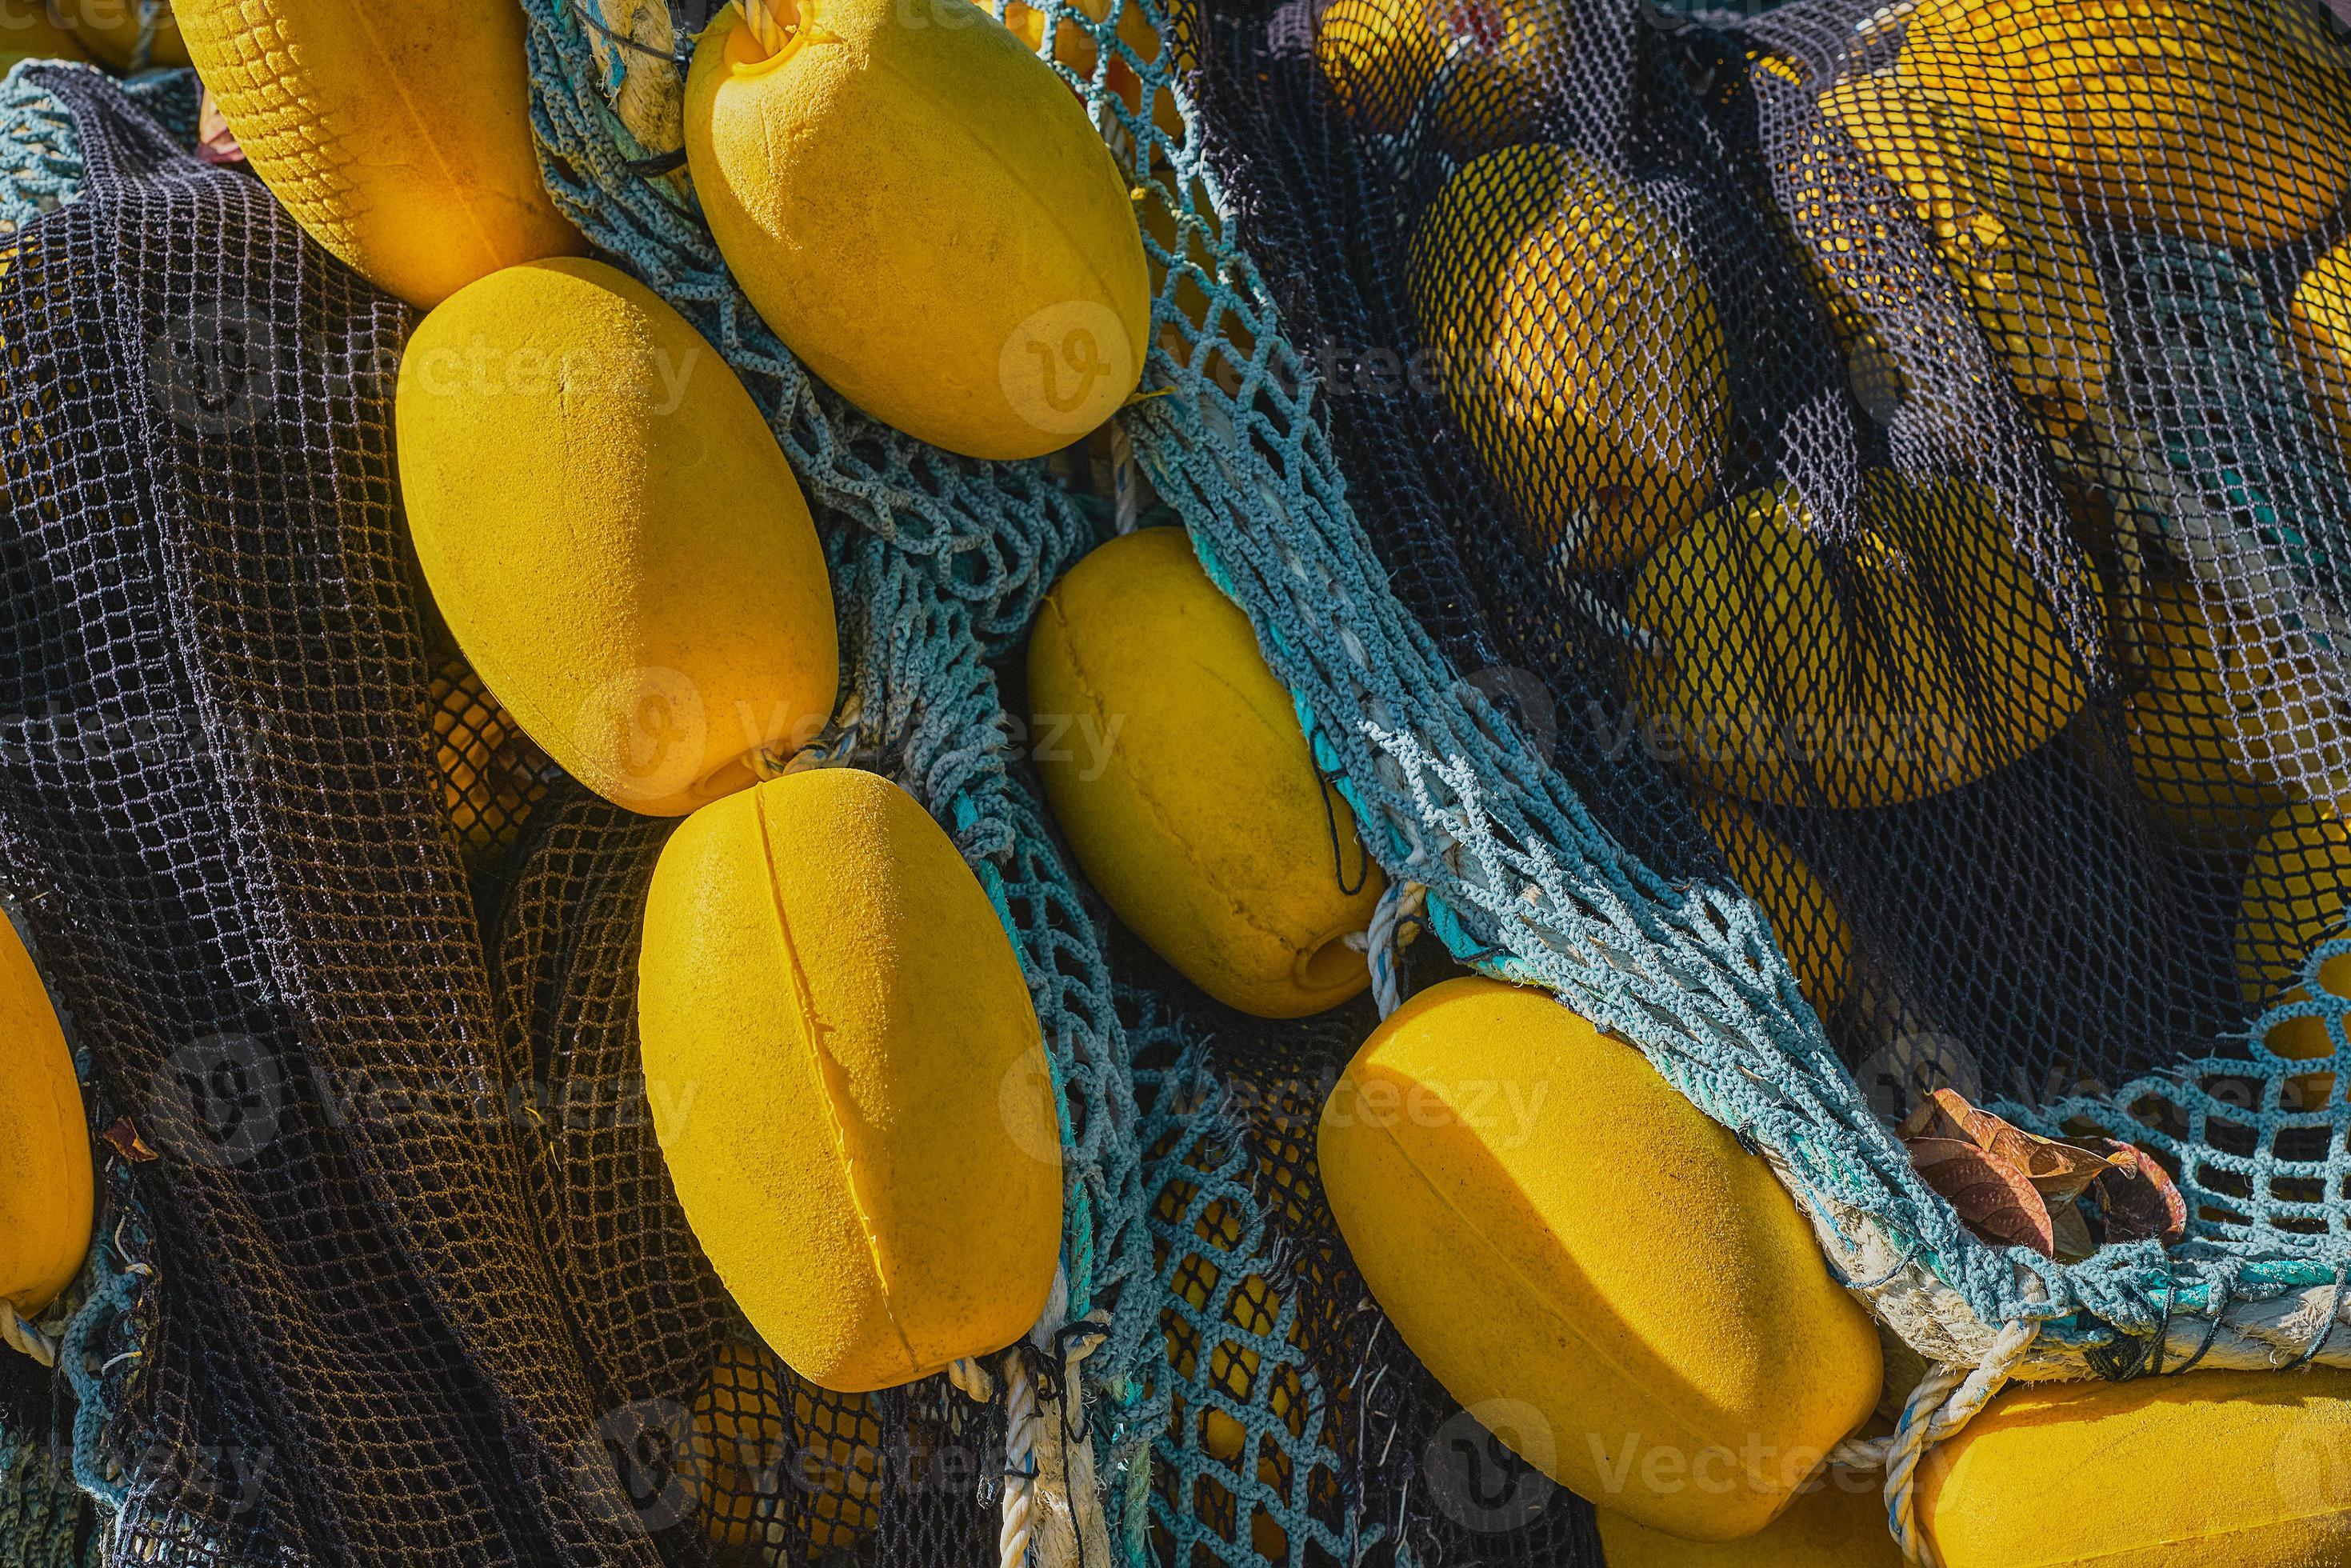 Fishing net with yellow floats dries on the pier, close-up